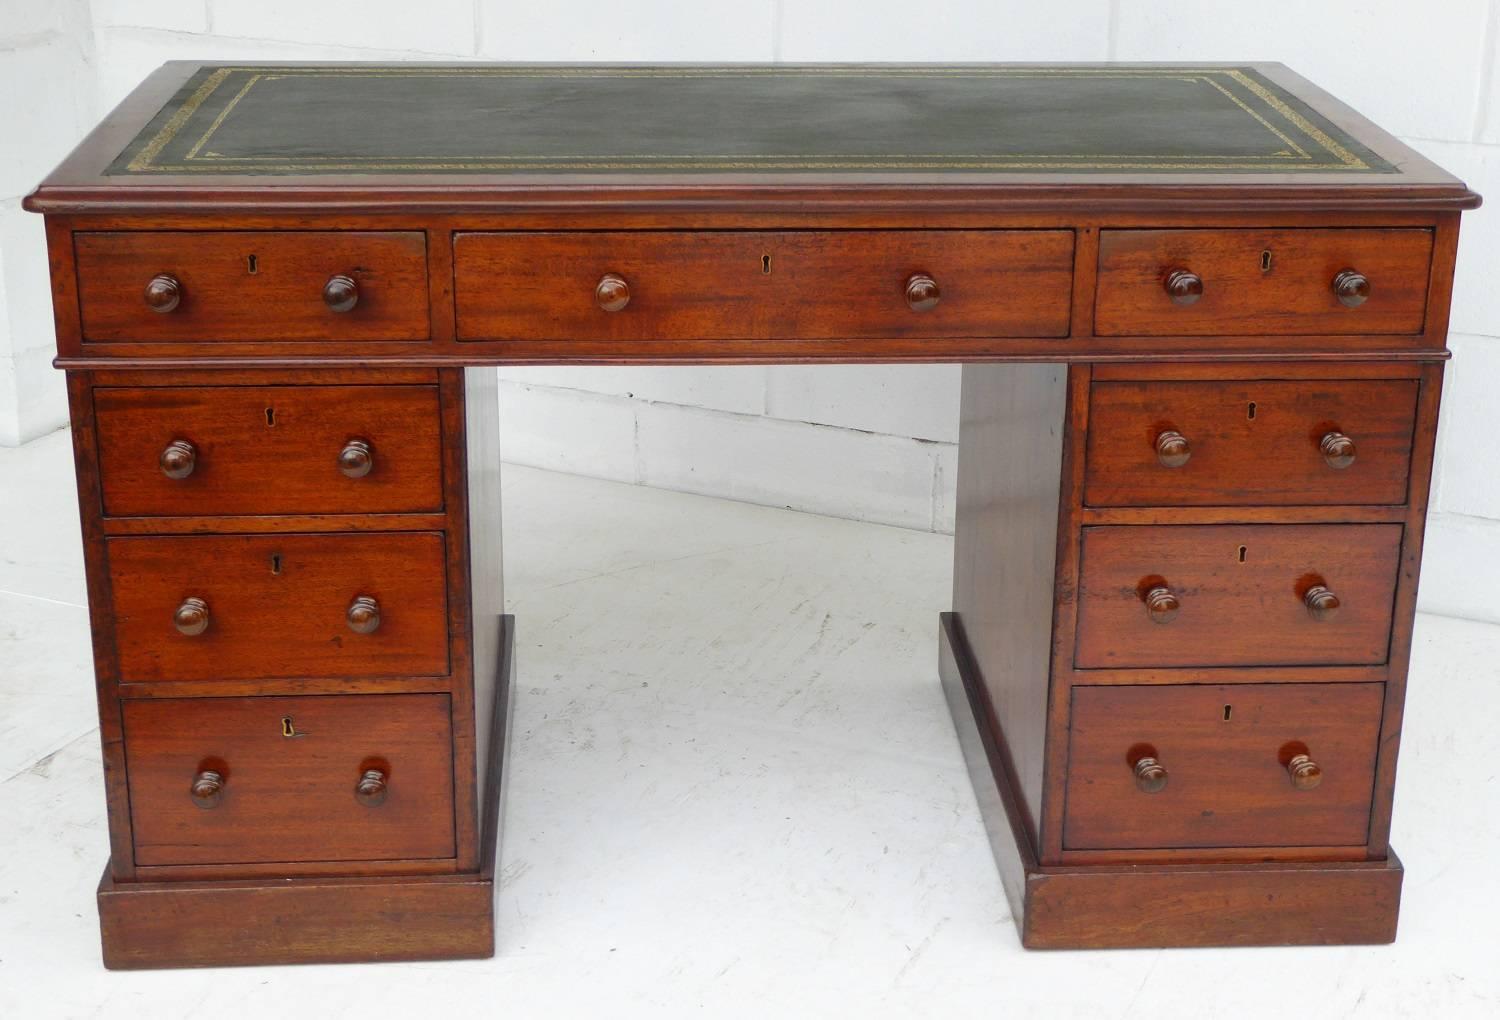 For sale is a fine quality Victorian solid mahogany pedestal desk by Holland & Sons. The top of the desk has a green leather hide insert, with decorative gold tooling. Below this there are three drawers, the centre of which being stamped 